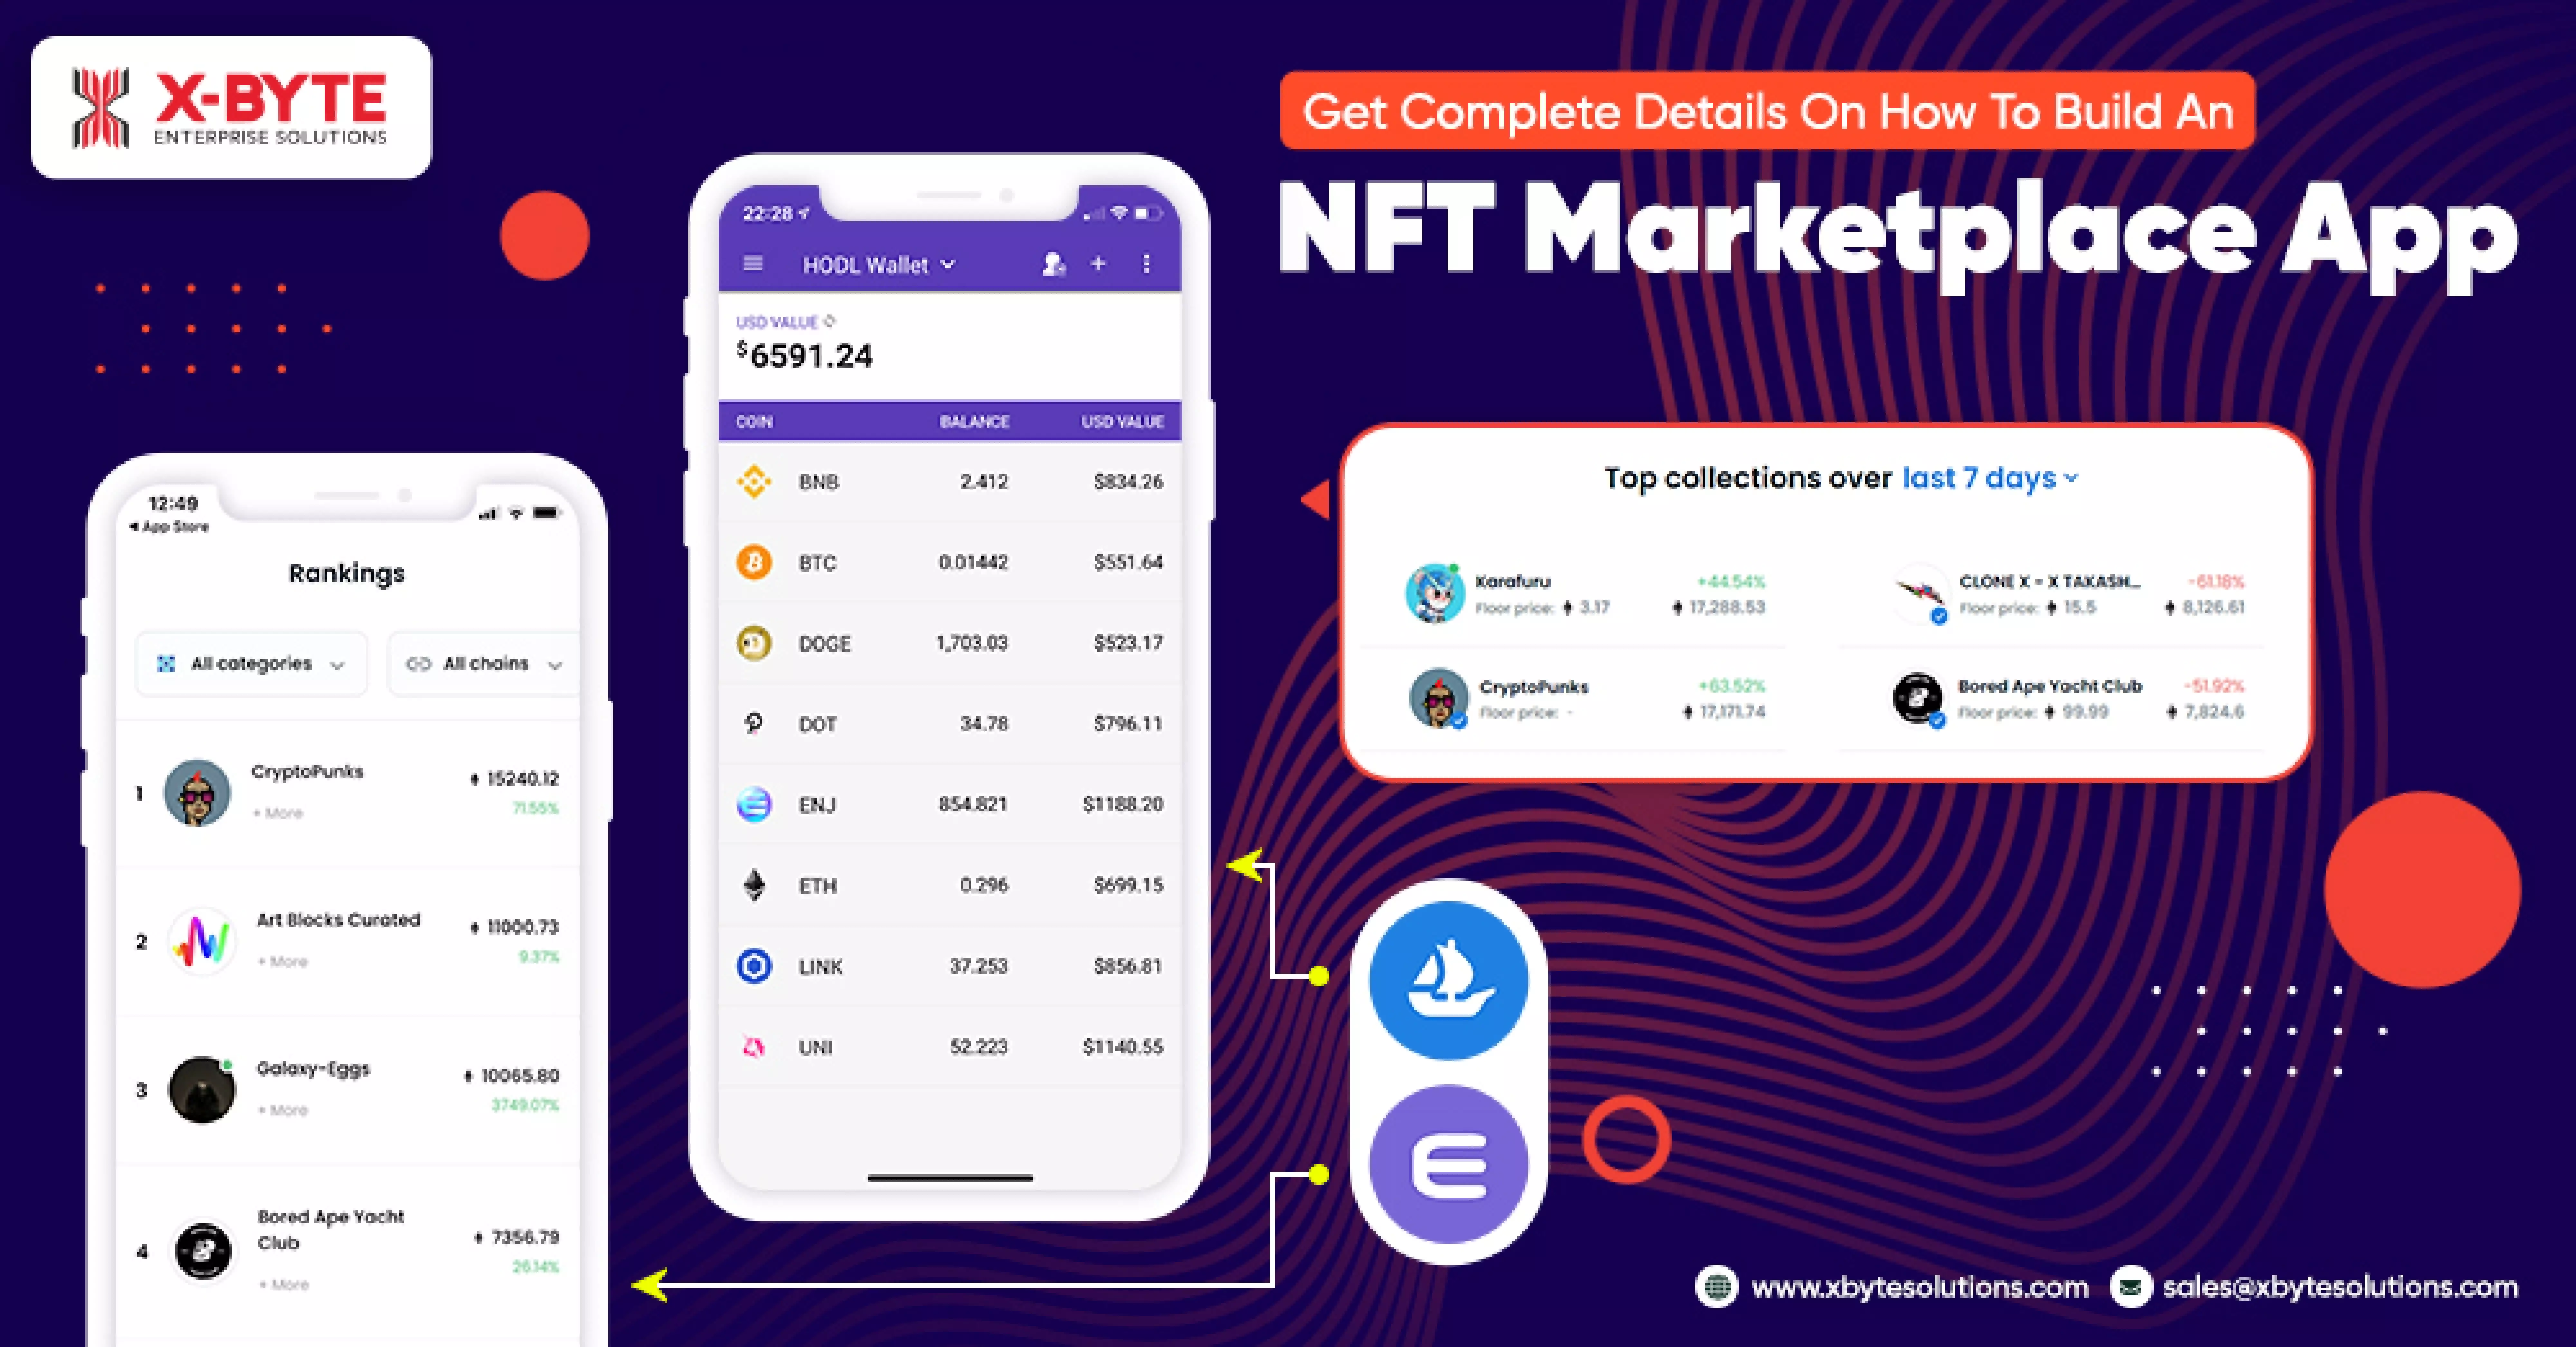 Get Complete Details On How To Build An NFT Marketplace